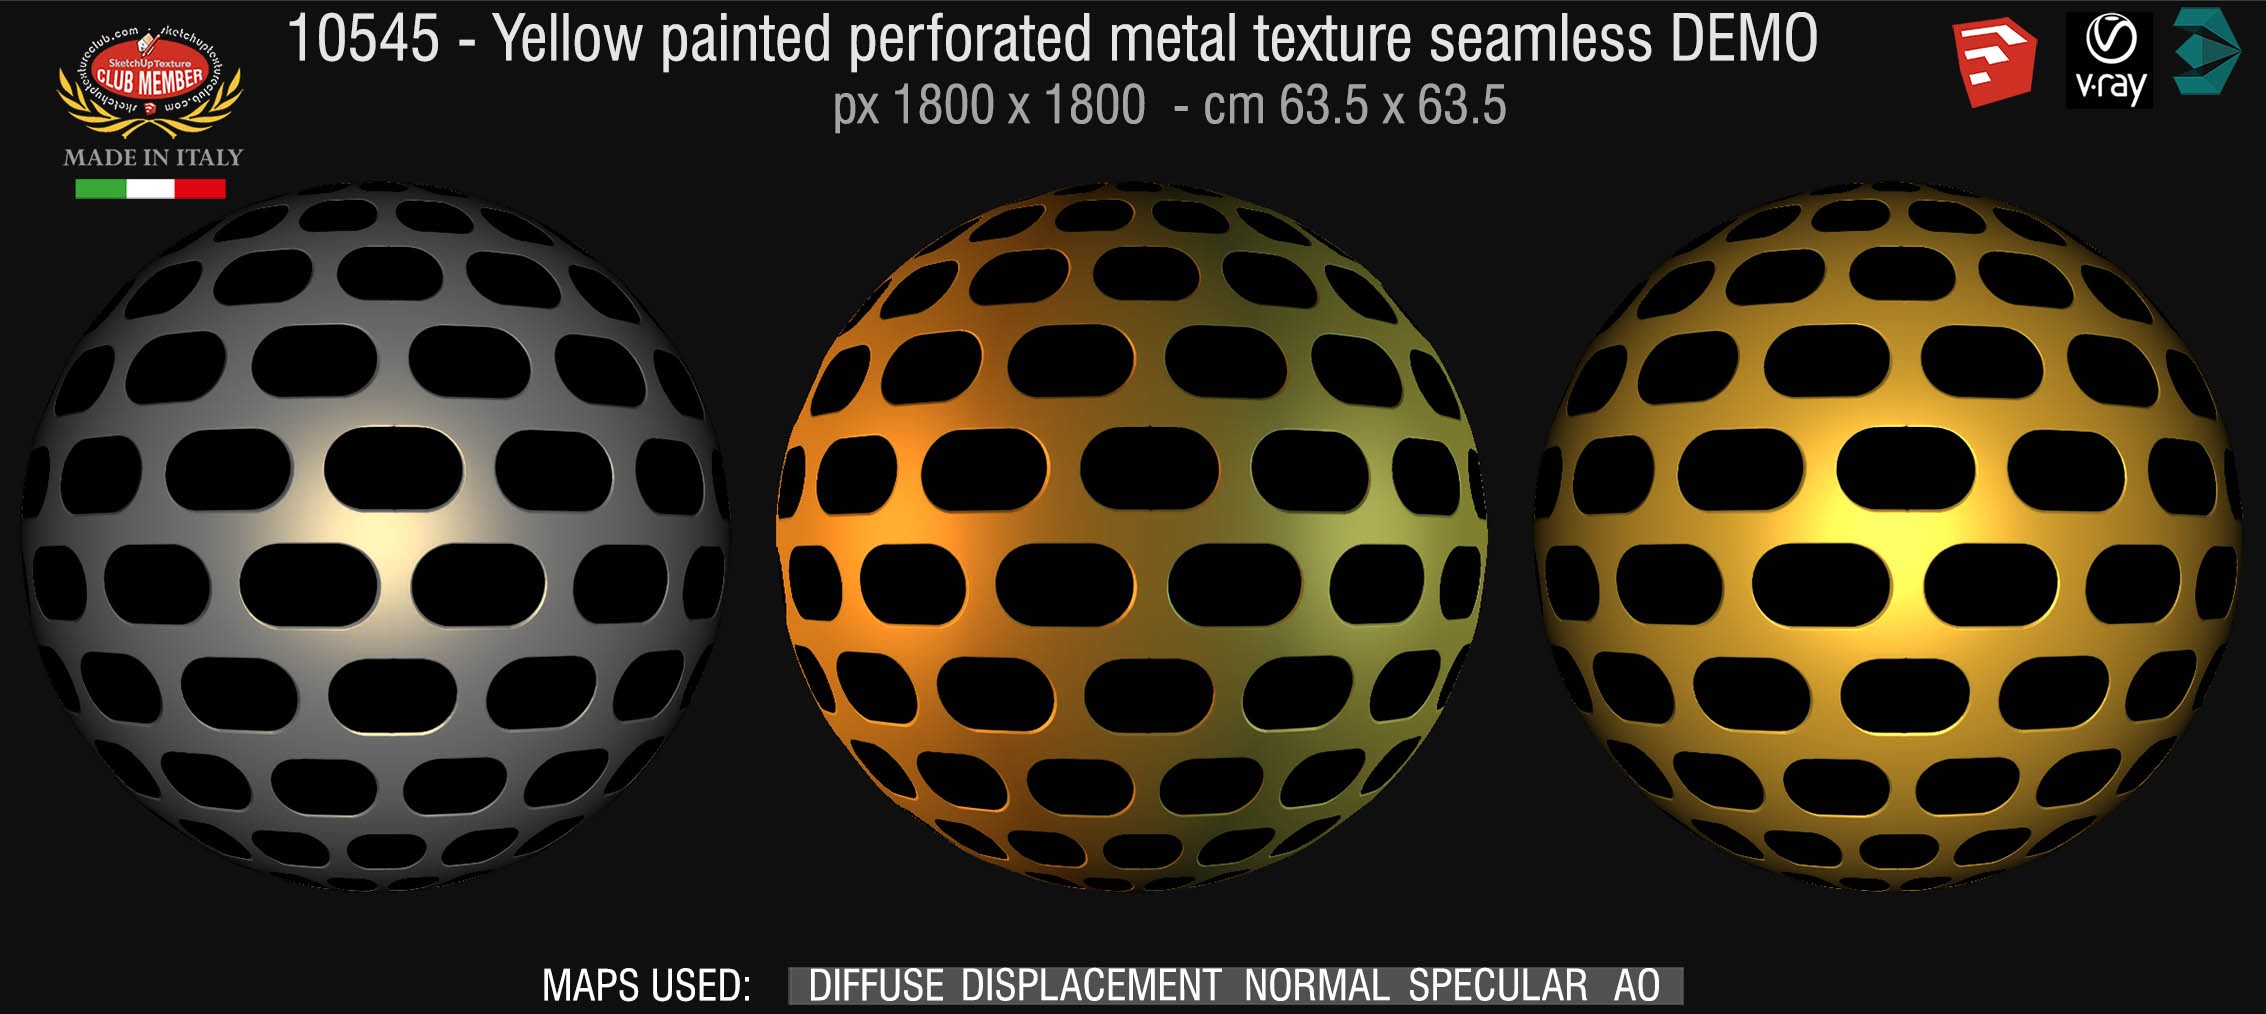 10546 Yellow painted perforate metal texture seamless + maps DEMO